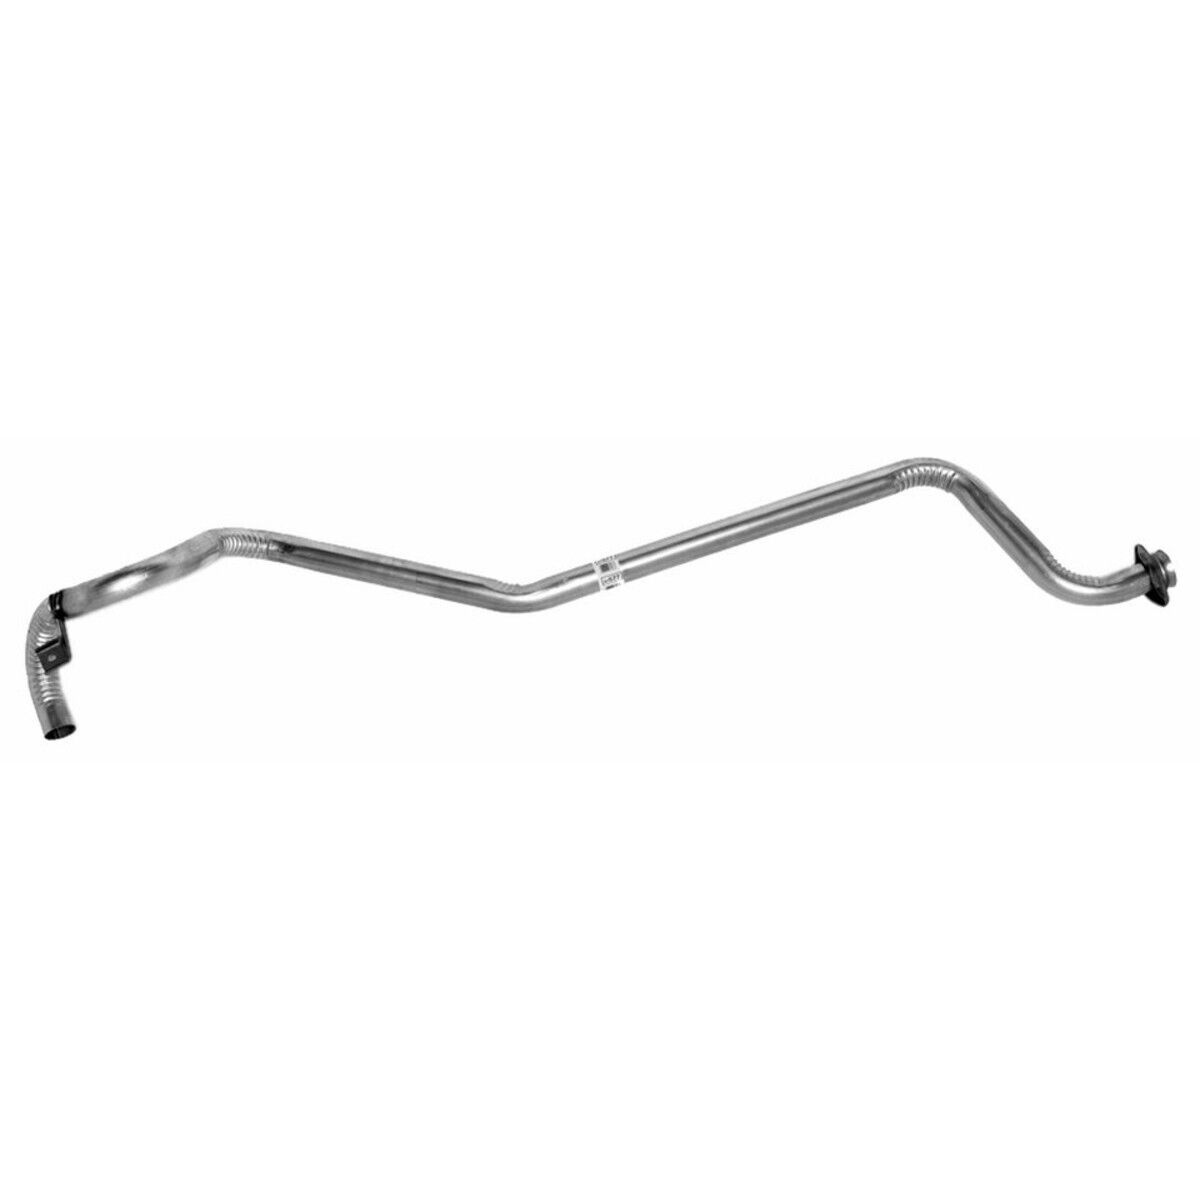 47577 Walker Exhaust Pipe for Chevy Olds Cutlass Chevrolet Malibu Grand Prix